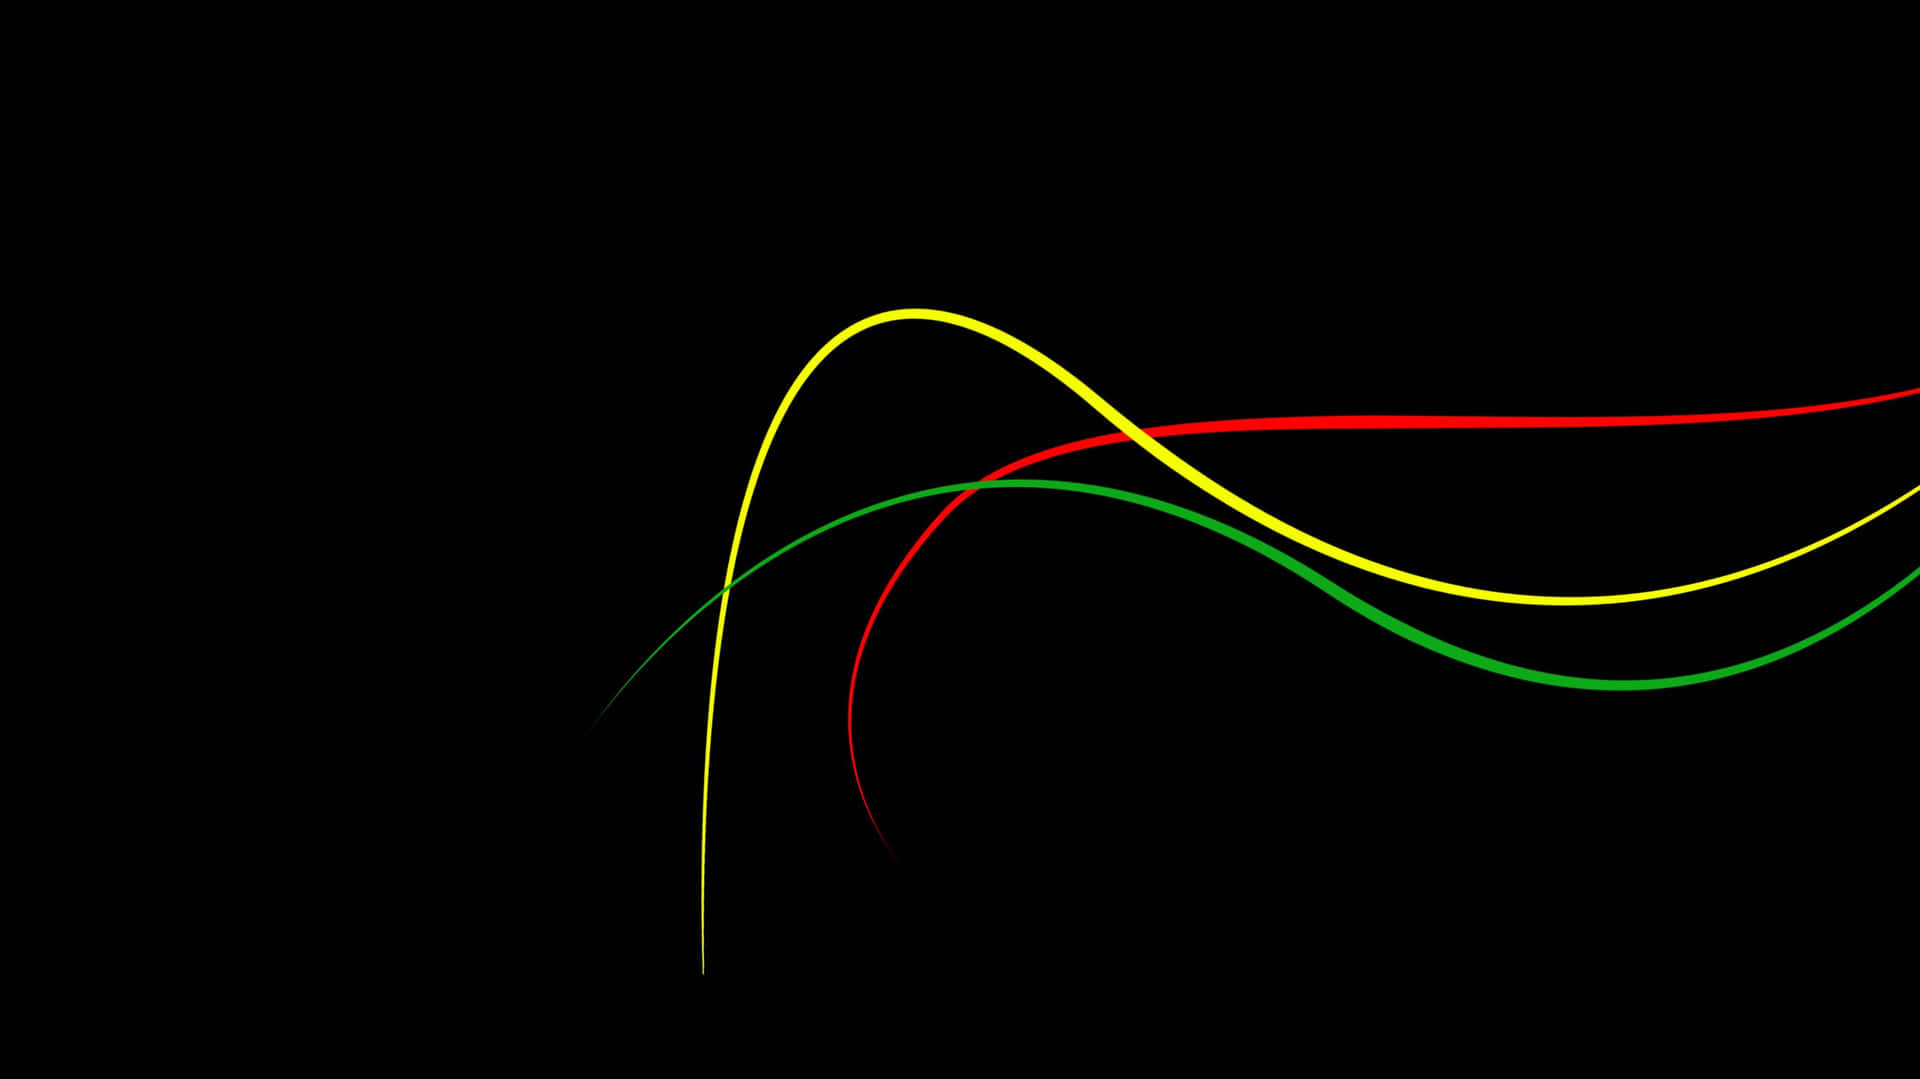 A Black Background With A Red, Green, And Blue Line